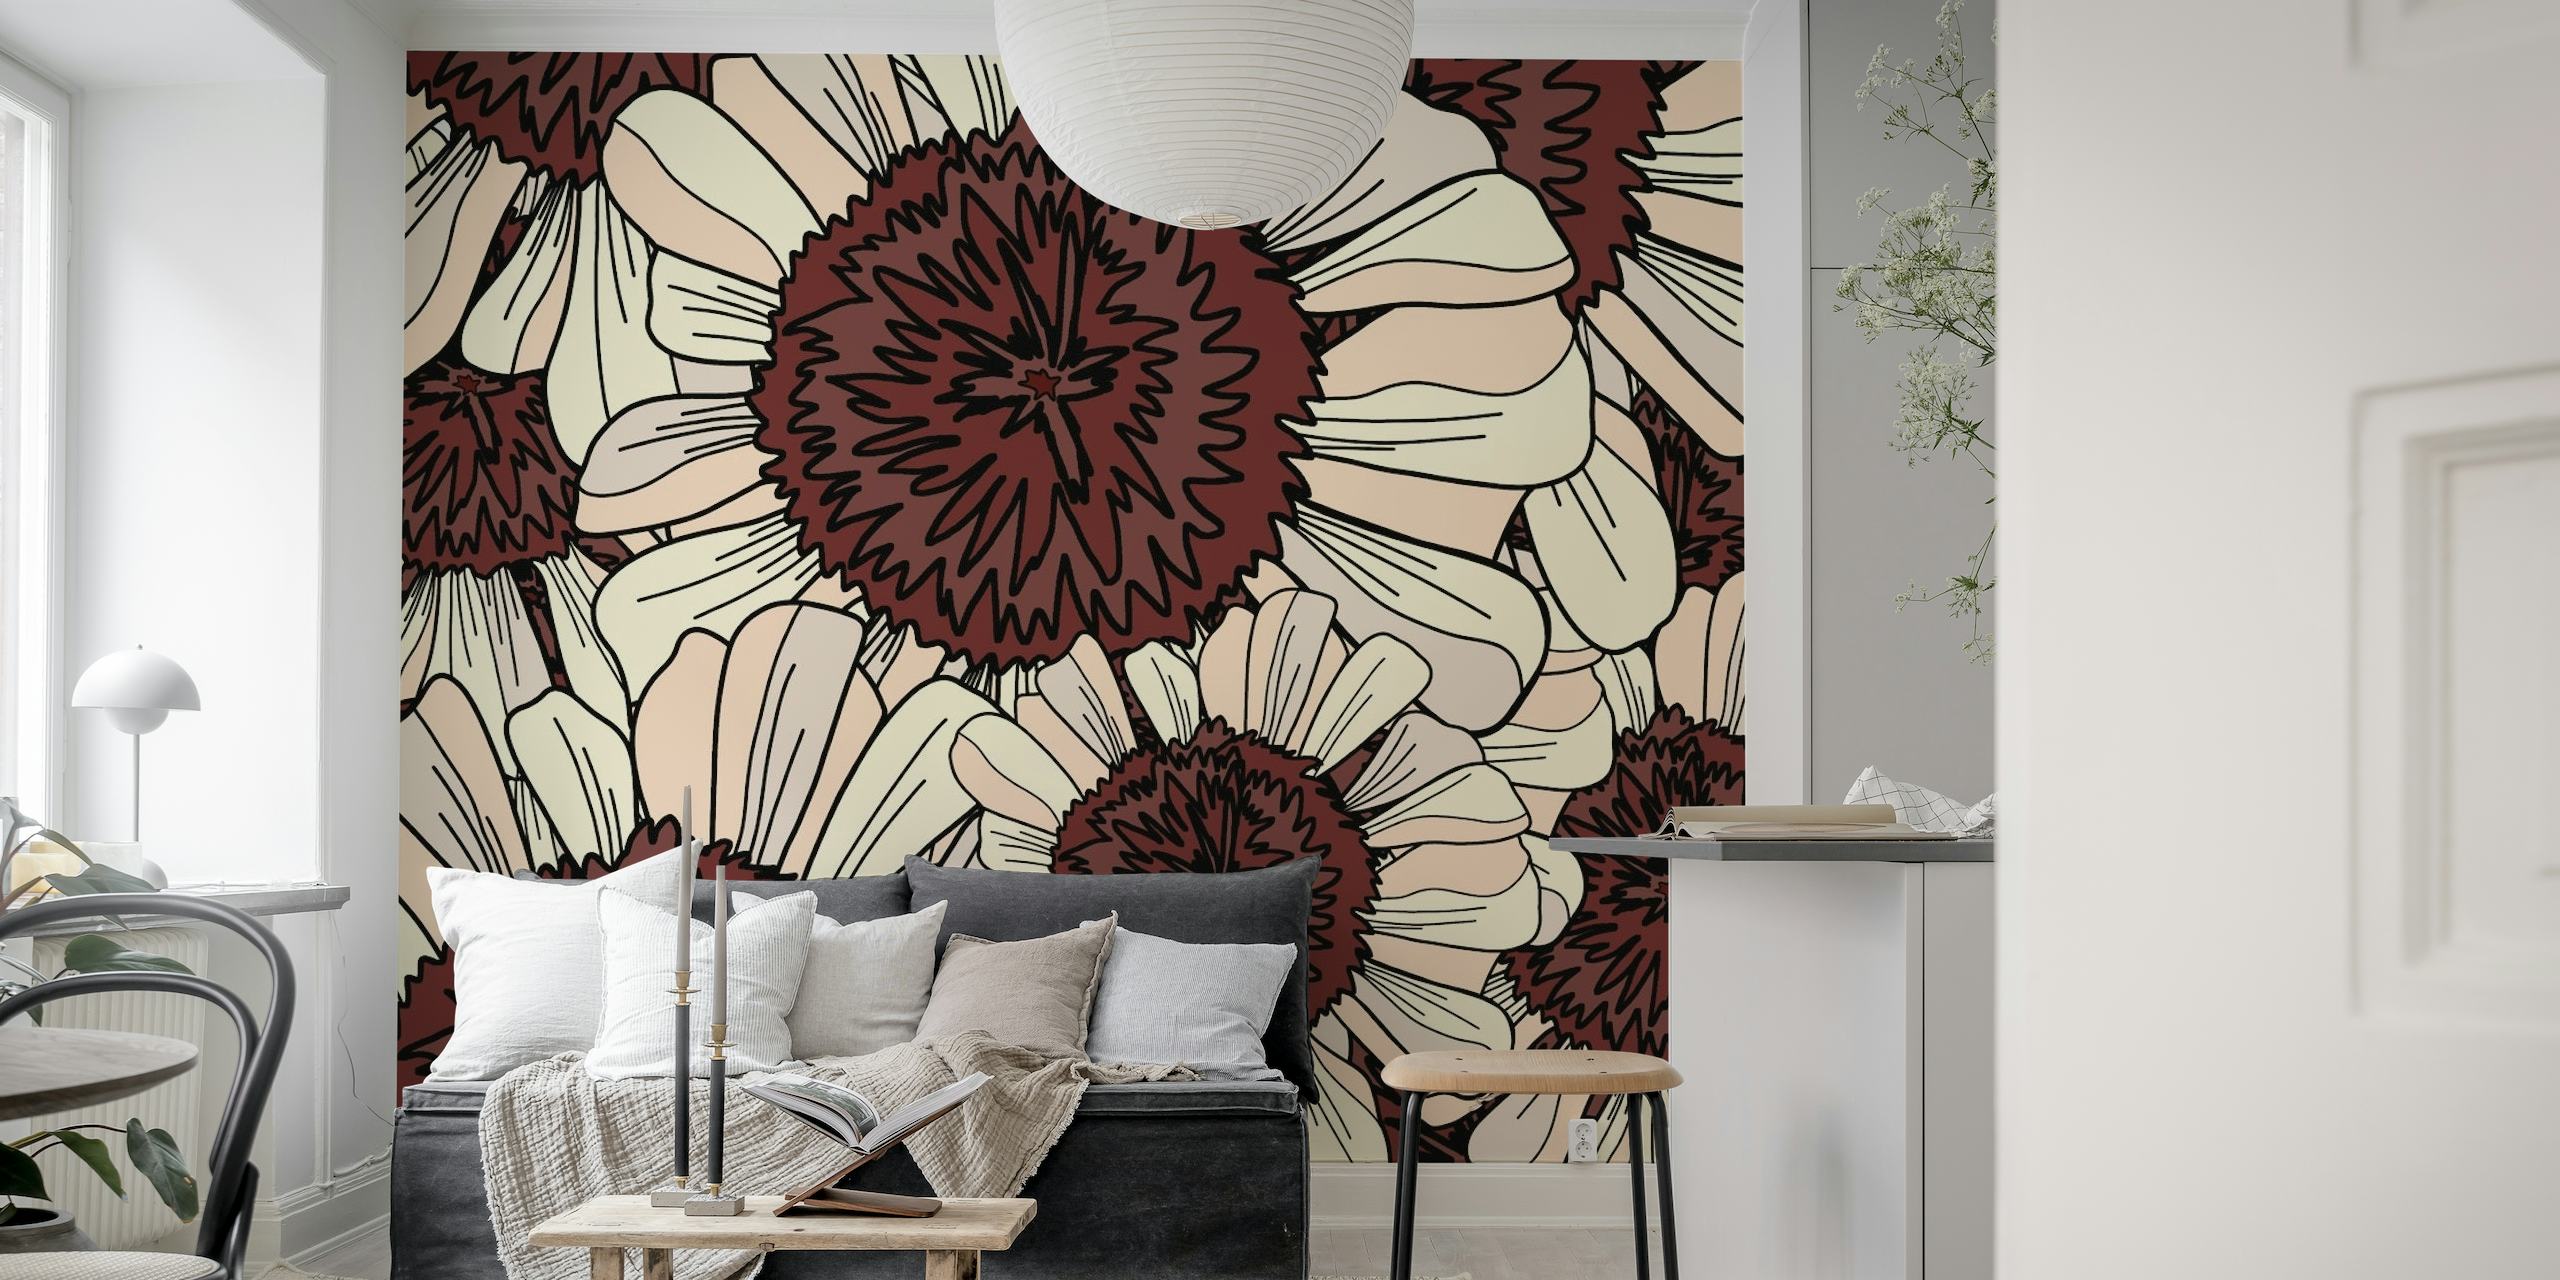 The Autumn Flowers wall mural with burgundy and cream botanical pattern